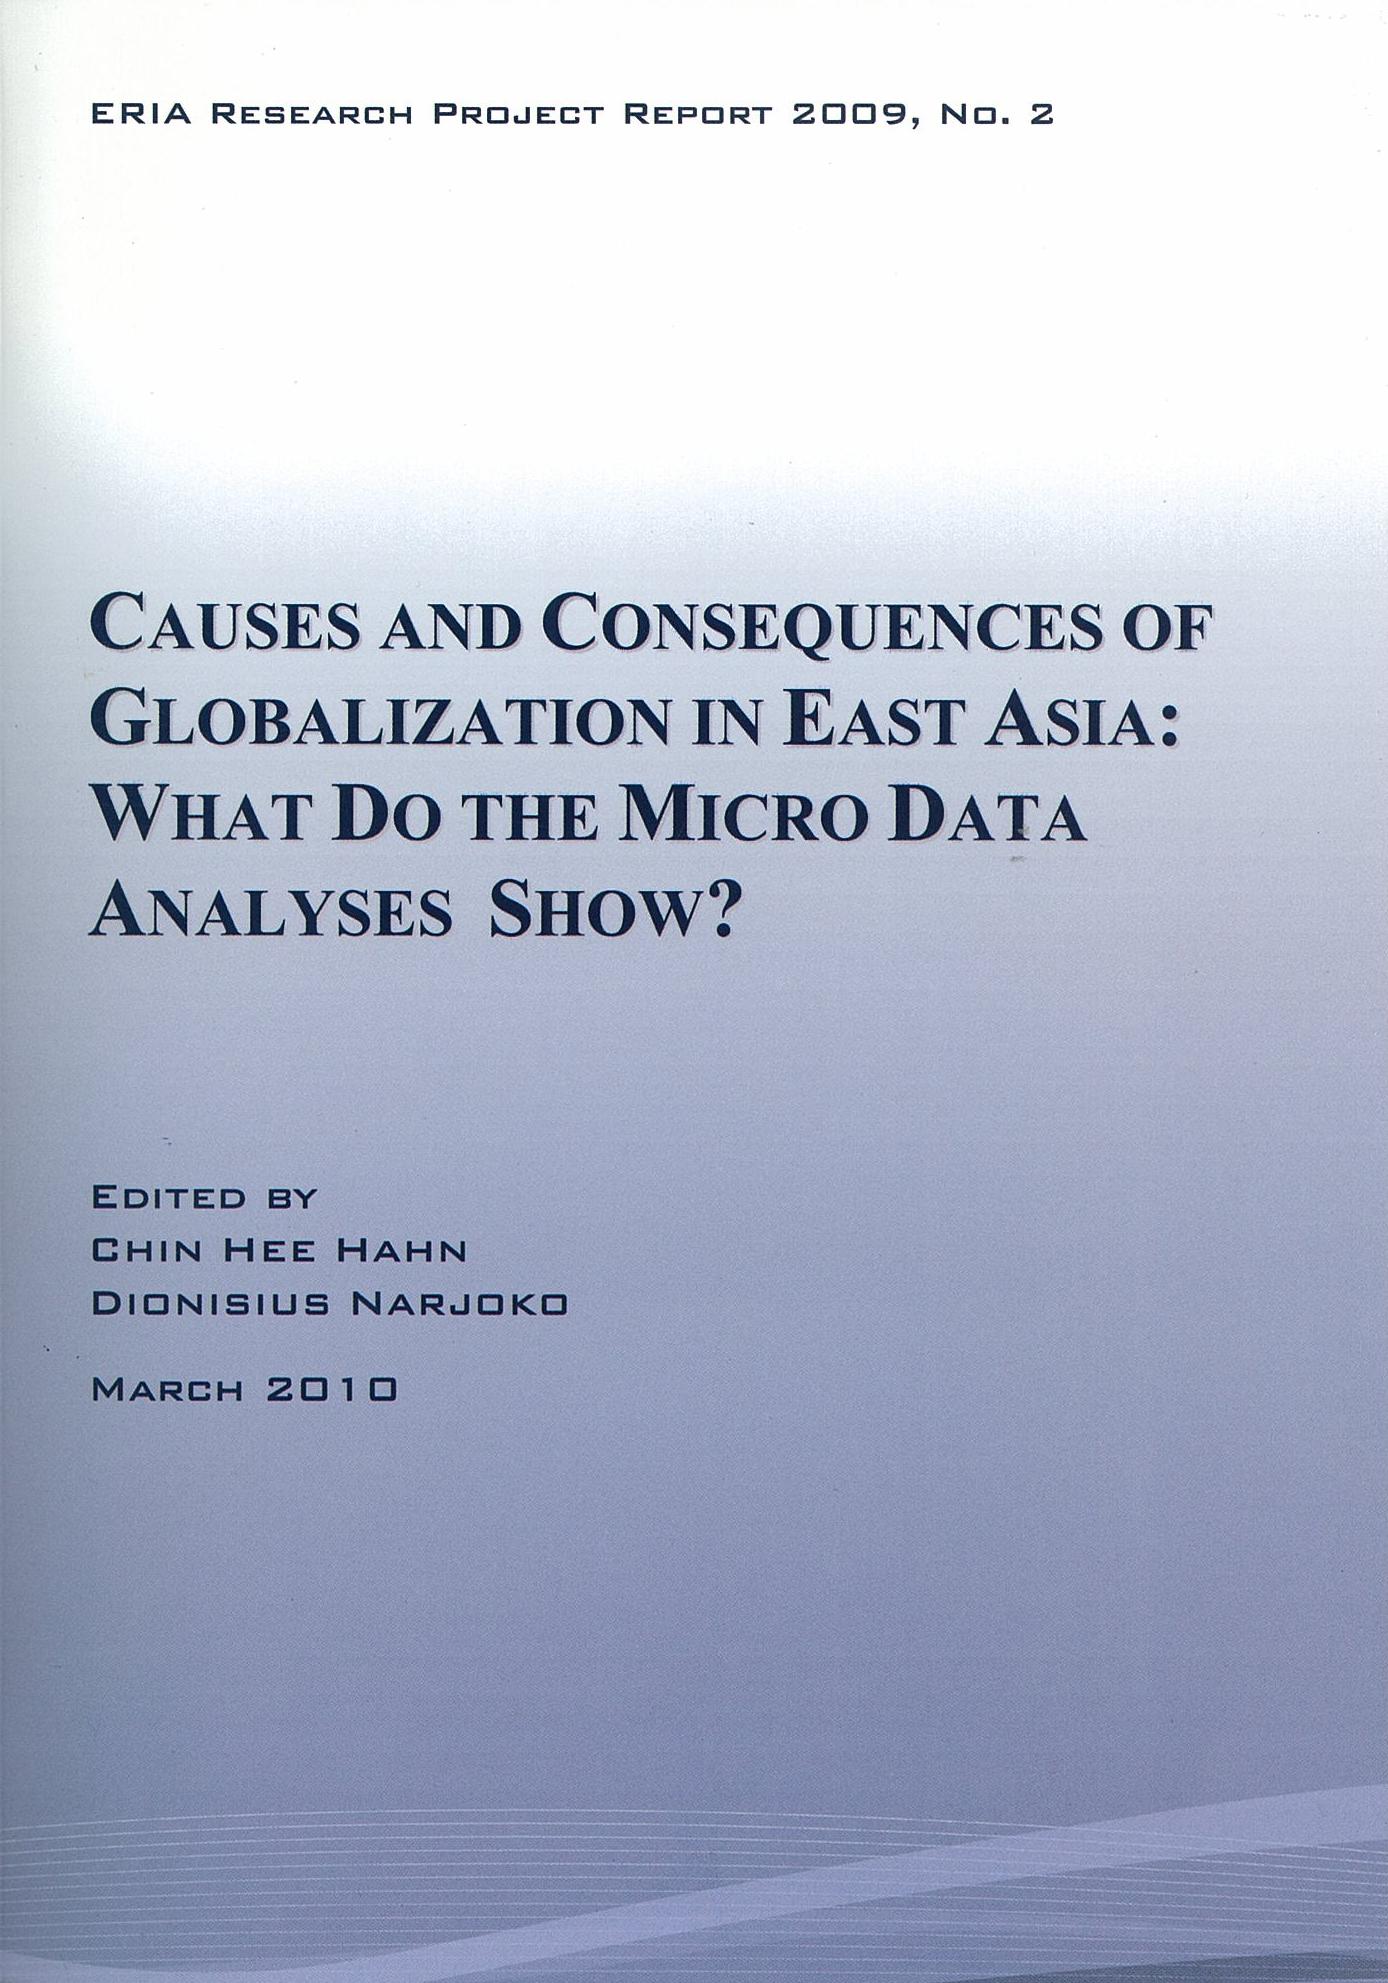 Causes and Consequences of Globalization in East Asia:  What Do The Micro Data Analyses Show?